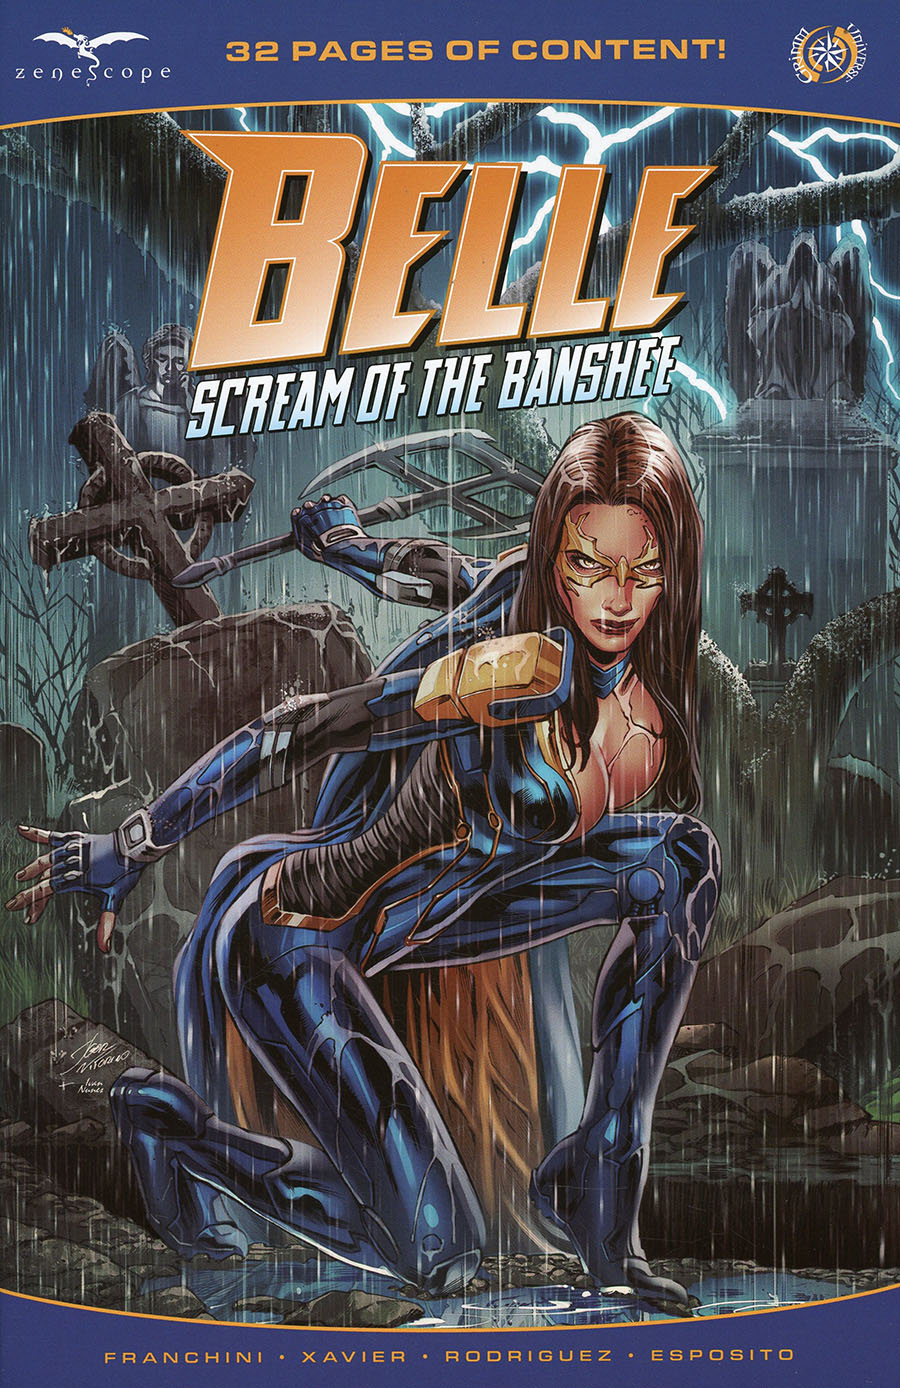 Grimm Fairy Tales Presents Belle Scream Of The Banshee #1 (One Shot) Cover A Igor Vitorino